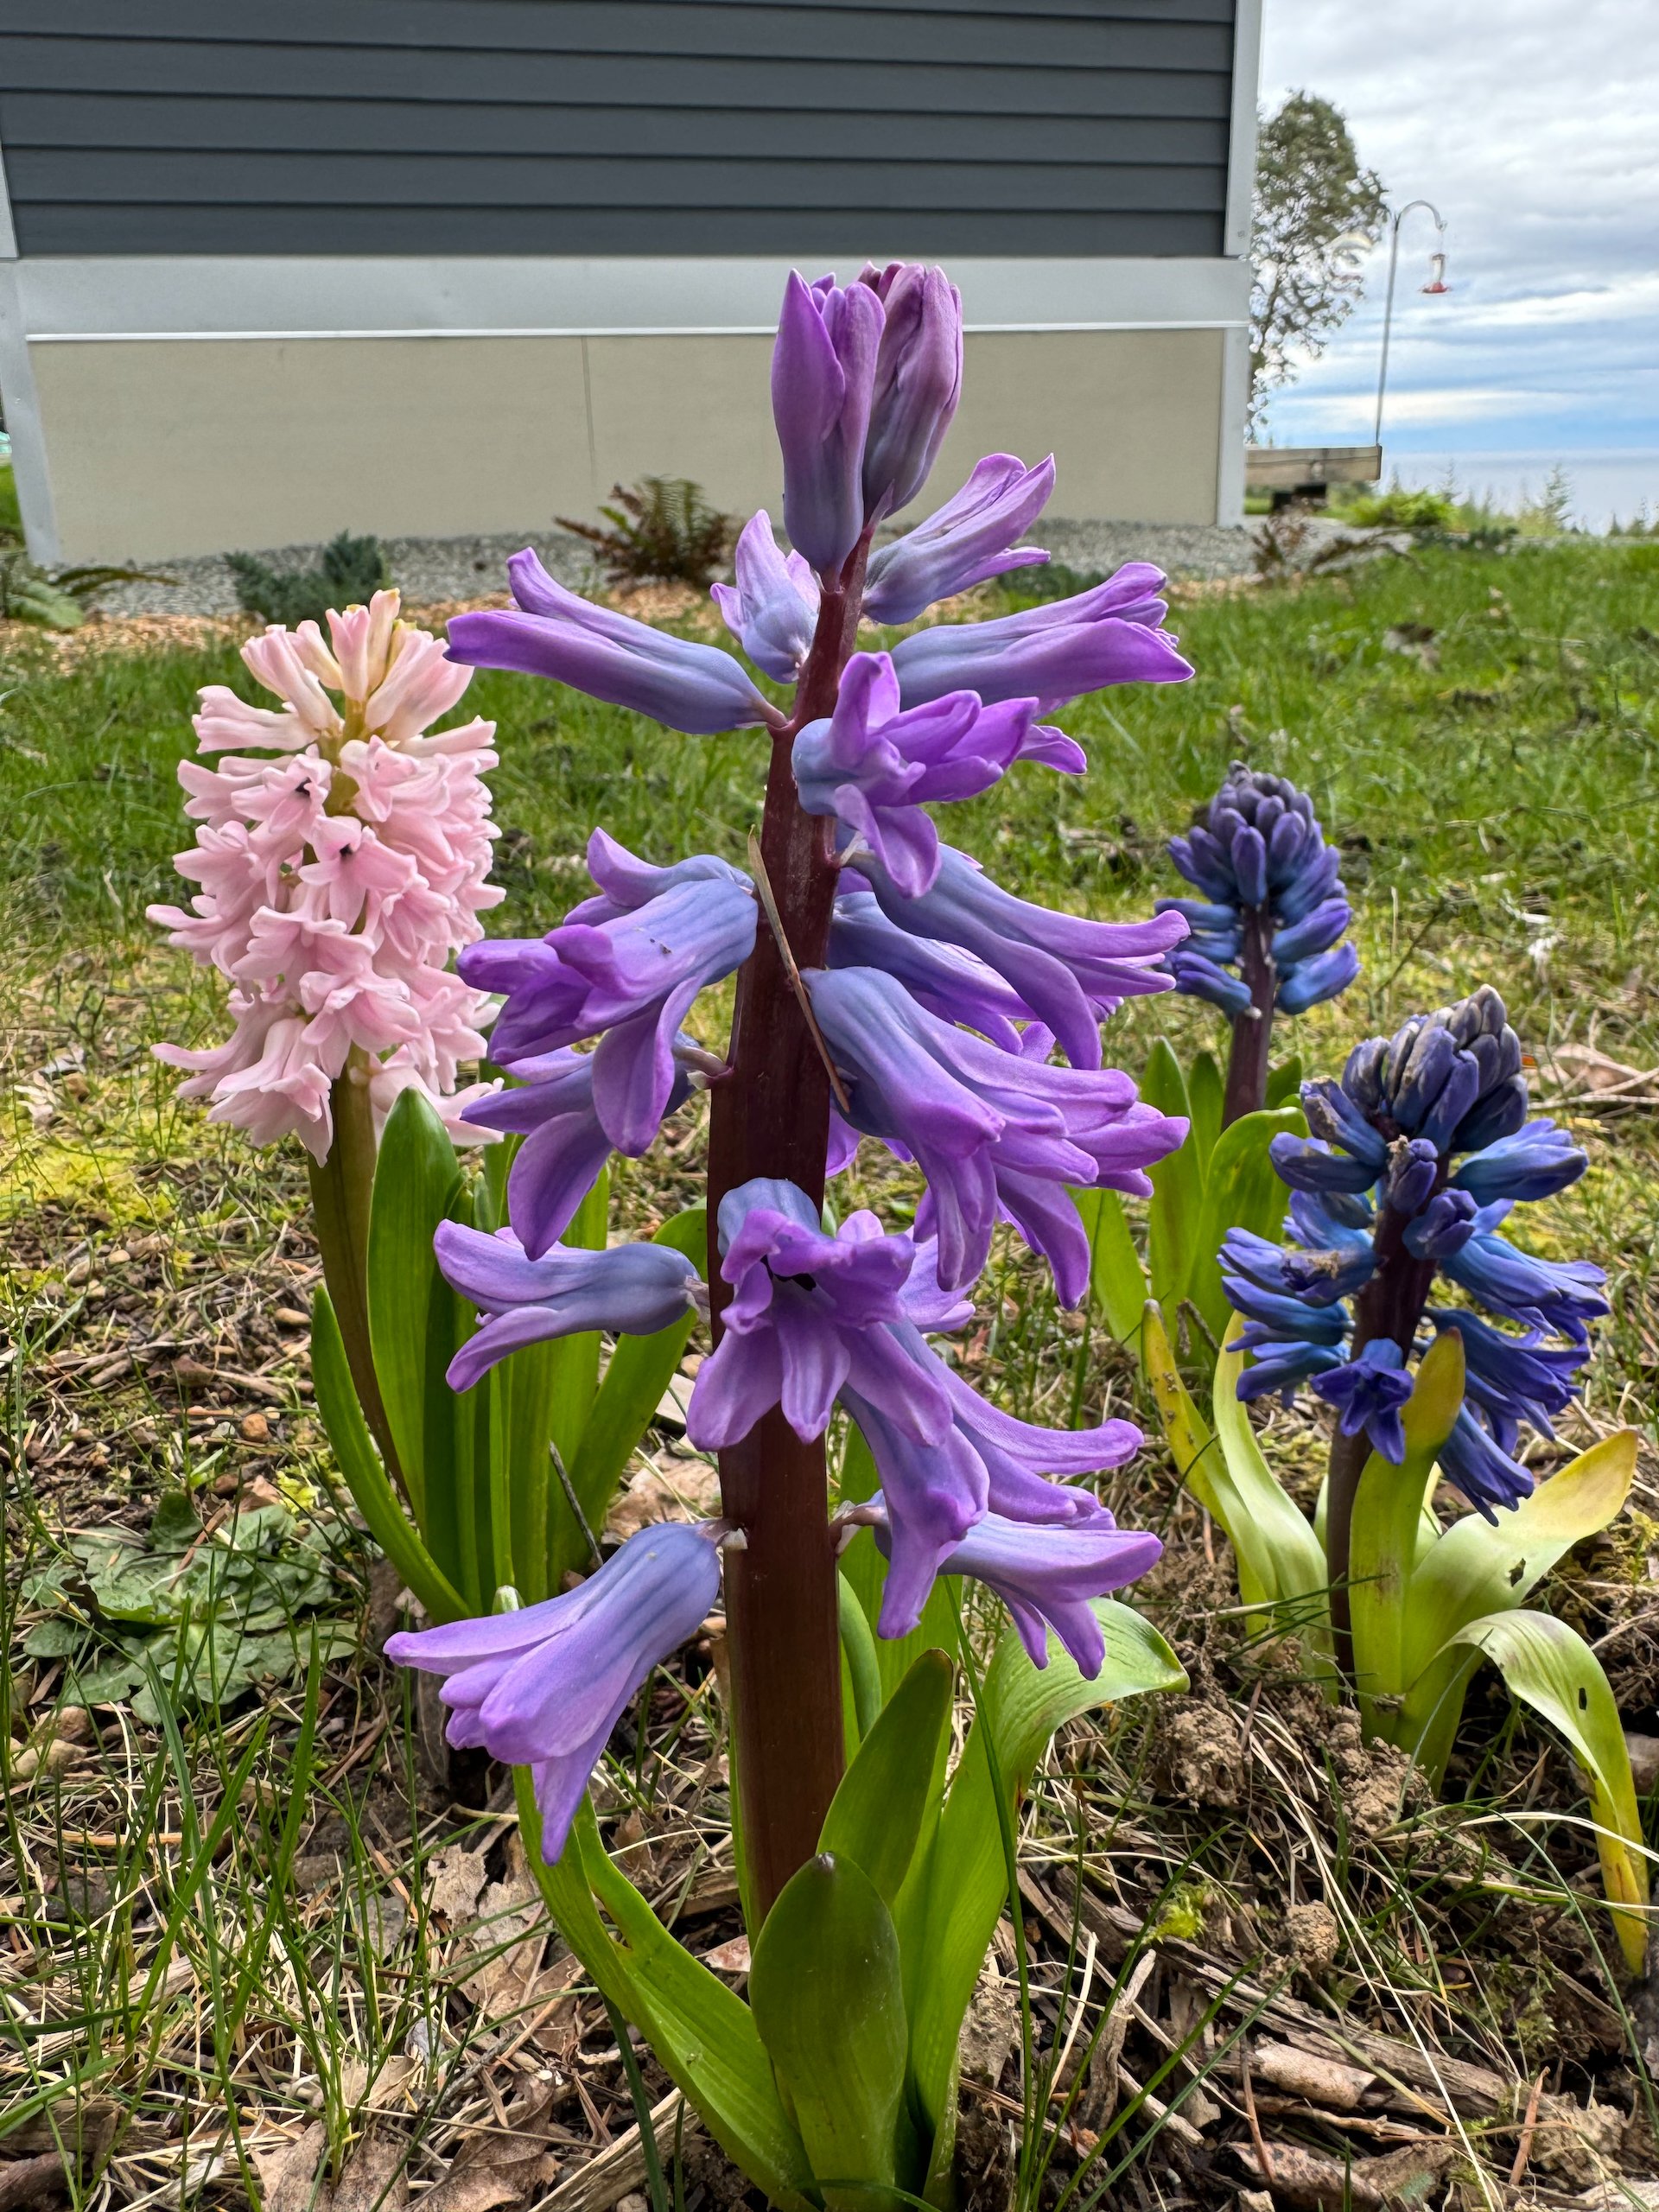  Hyacinths are just such cool flowers.  